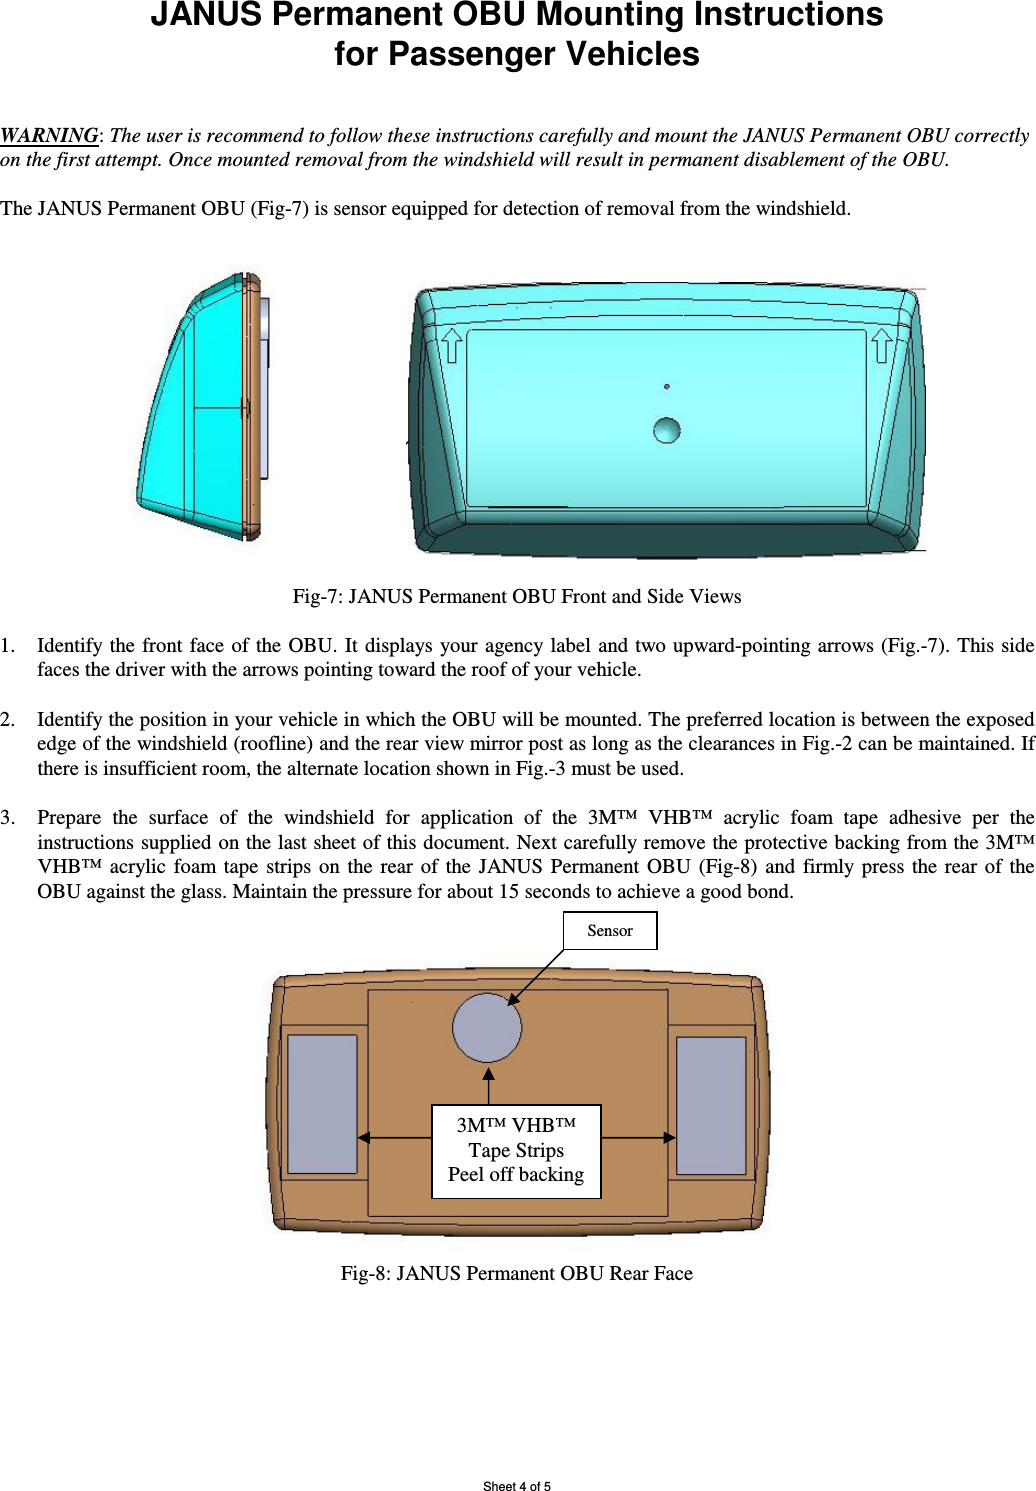 Sheet 4 of 5 JANUS Permanent OBU Mounting Instructions  for Passenger Vehicles   WARNING: The user is recommend to follow these instructions carefully and mount the JANUS Permanent OBU correctly on the first attempt. Once mounted removal from the windshield will result in permanent disablement of the OBU.   The JANUS Permanent OBU (Fig-7) is sensor equipped for detection of removal from the windshield.                                                 Fig-7: JANUS Permanent OBU Front and Side Views  1. Identify the front face  of the OBU. It displays your agency label  and two upward-pointing arrows (Fig.-7). This side faces the driver with the arrows pointing toward the roof of your vehicle.  2. Identify the position in your vehicle in which the OBU will be mounted. The preferred location is between the exposed edge of the windshield (roofline) and the rear view mirror post as long as the clearances in Fig.-2 can be maintained. If there is insufficient room, the alternate location shown in Fig.-3 must be used. 3. Prepare  the  surface  of  the  windshield  for  application  of  the  3M™  VHB™  acrylic  foam  tape  adhesive  per  the instructions supplied on the last sheet of this document. Next carefully remove the protective backing from the 3M™ VHB™  acrylic  foam  tape  strips  on  the  rear  of  the  JANUS  Permanent  OBU  (Fig-8)  and  firmly  press  the  rear  of the OBU against the glass. Maintain the pressure for about 15 seconds to achieve a good bond.  Fig-8: JANUS Permanent OBU Rear Face   Sensor 3M™ VHB™ Tape Strips Peel off backing 